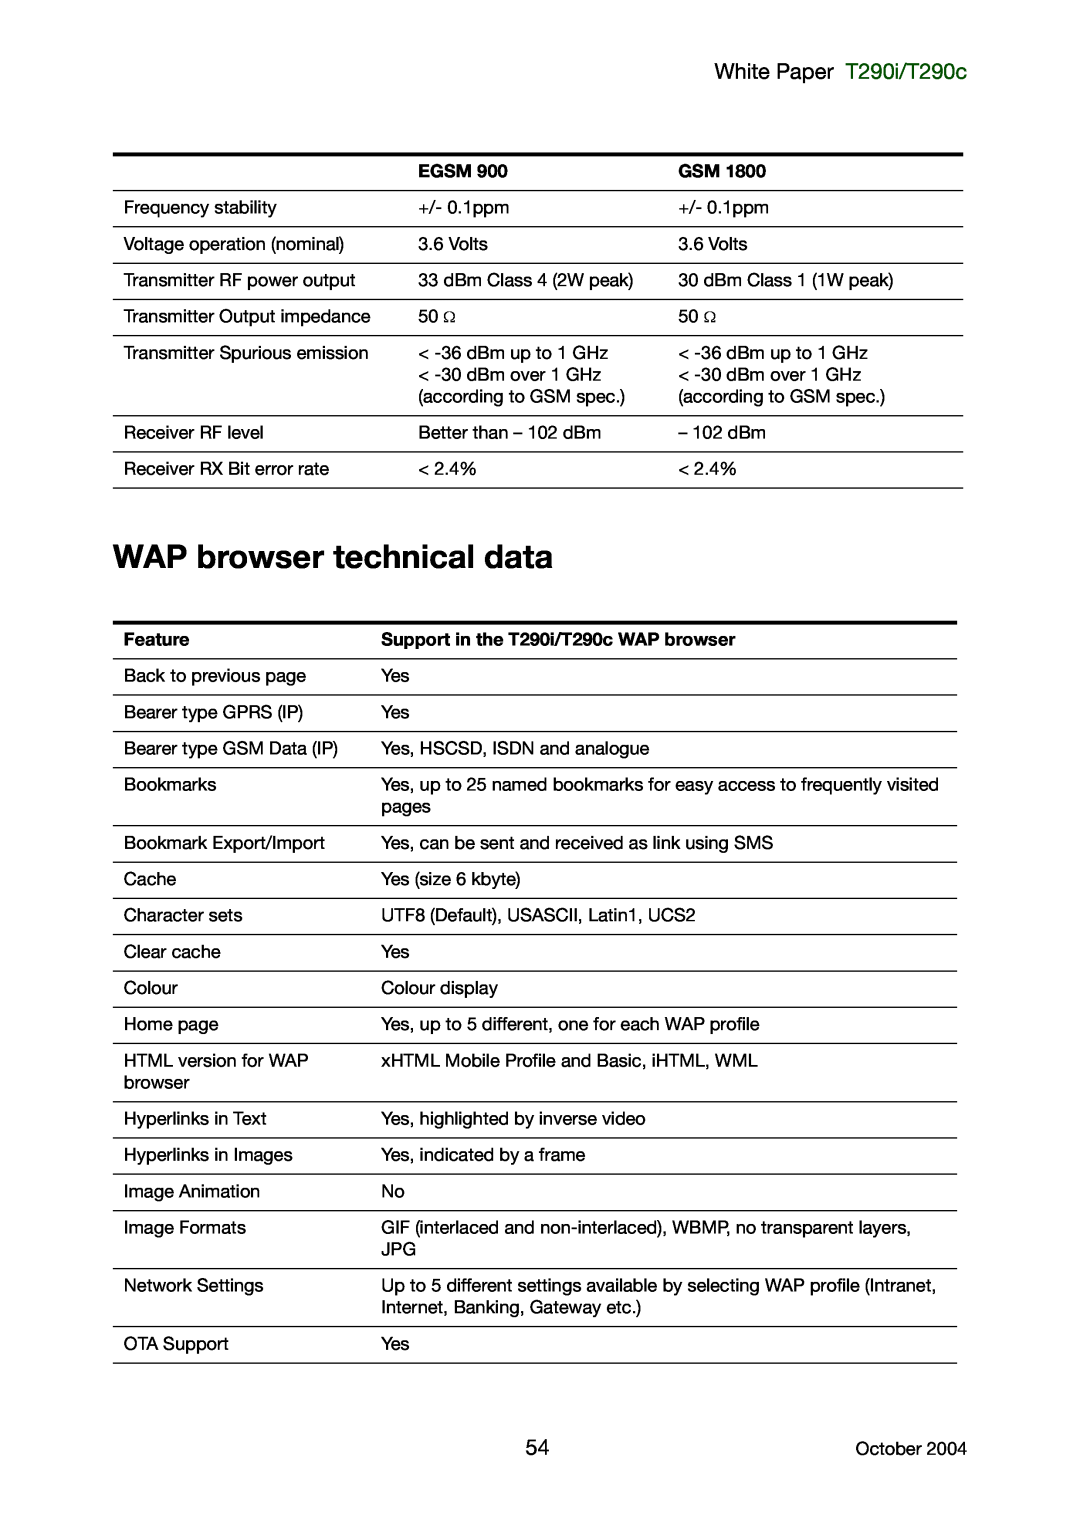 Sony Ericsson manual WAP browser technical data, White Paper T290i/T290c 